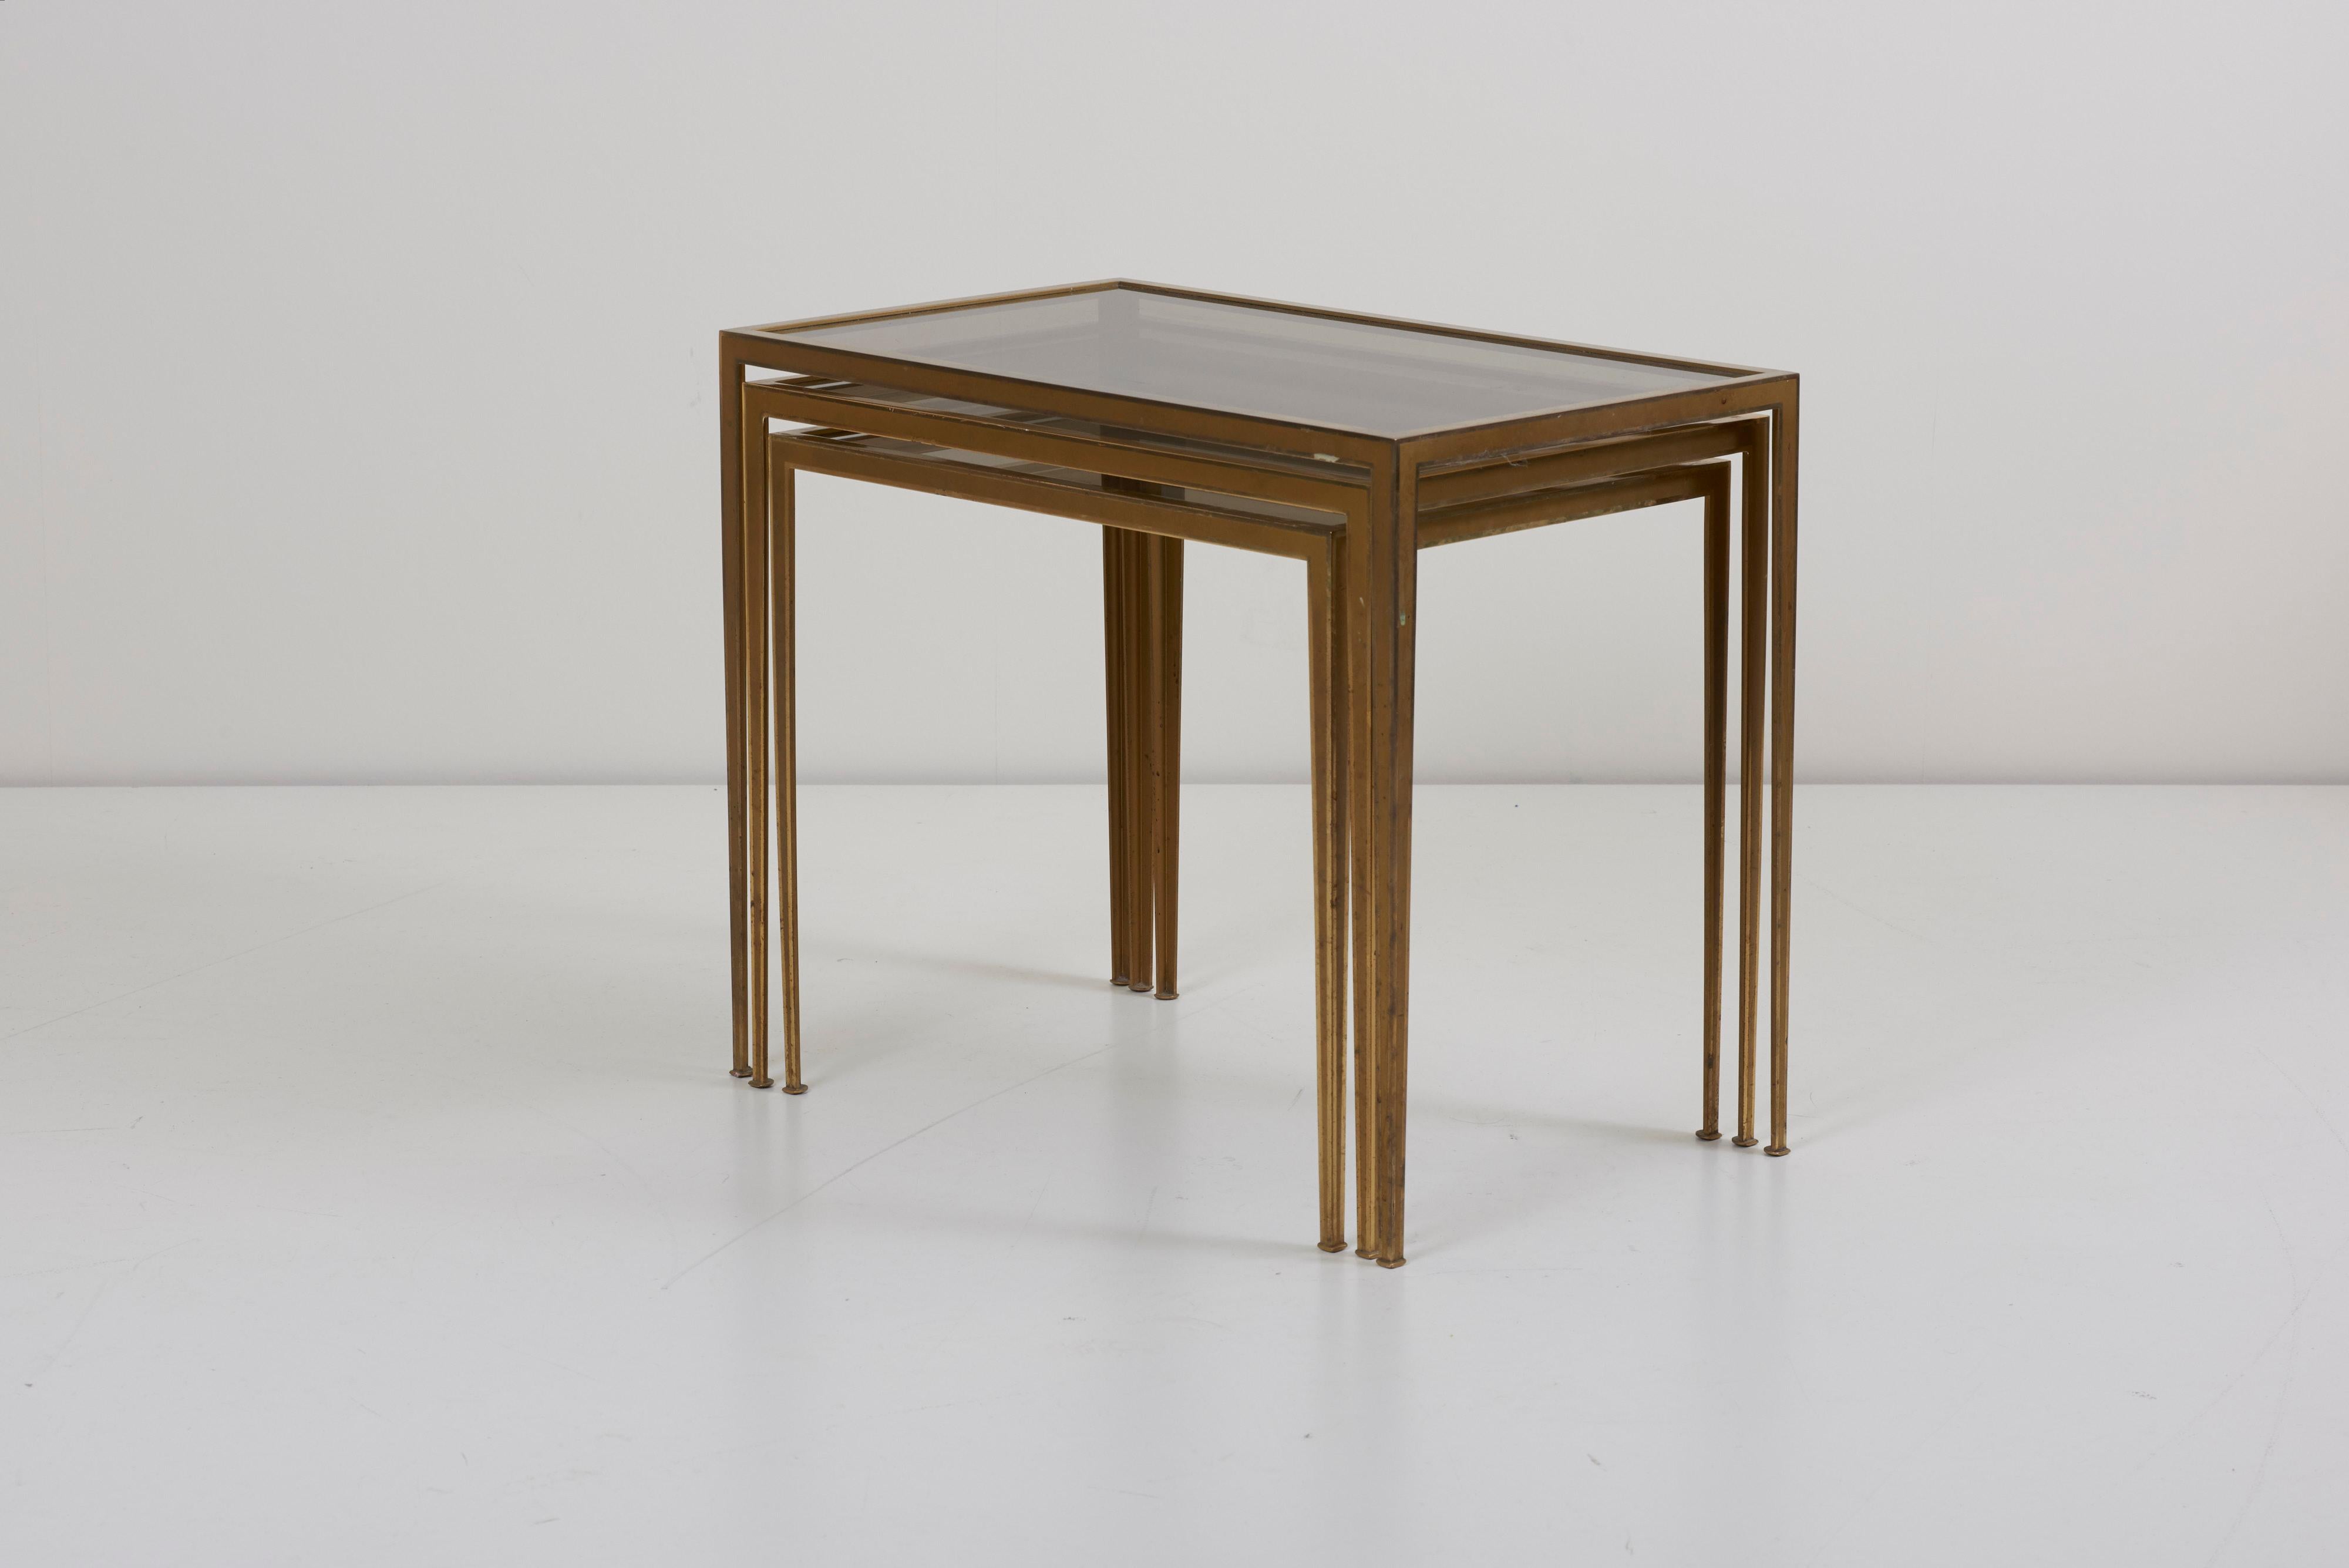 Wonderful set of three brass nesting tables with glass tops in very good vintage condition. The table legs in tapering shape providing elegance and lightness to the tables. Measurements show the biggest table.